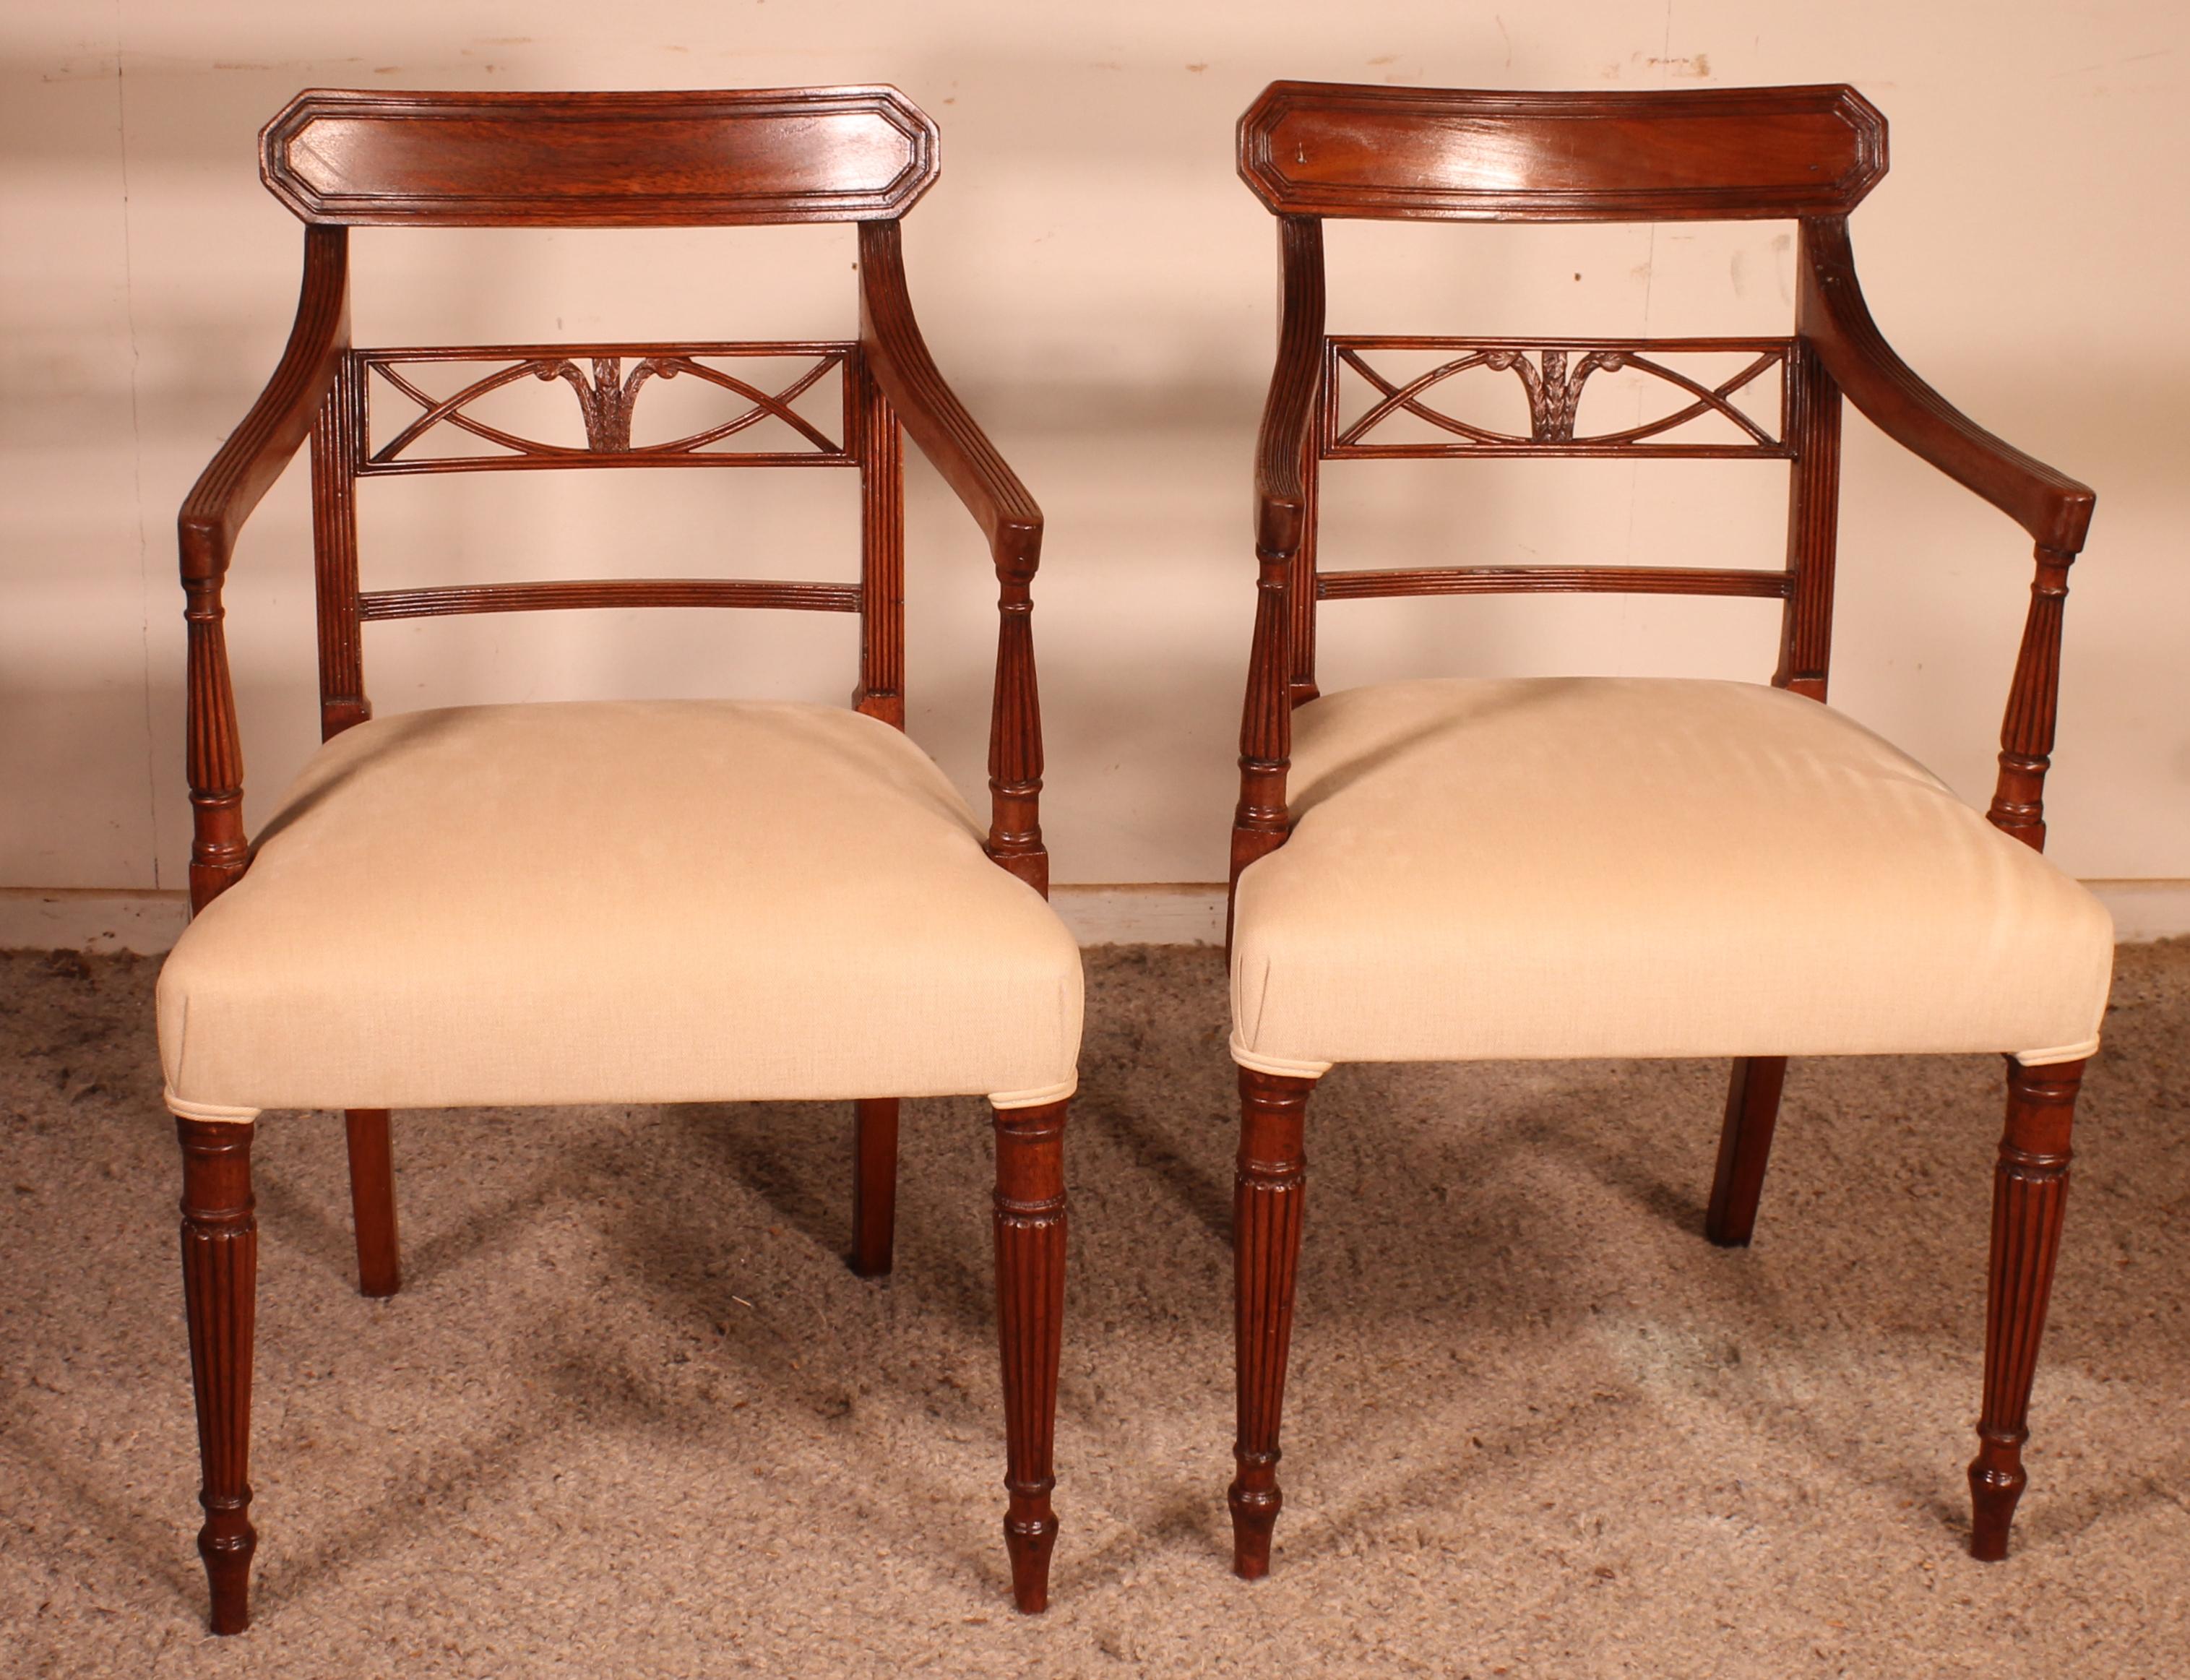 Beautiful pair of 19th century English mahogany armchairs.
Very beautiful pair which has a very beautiful base as well as a carved back rest.

The armchairs have been checked and repolished and reupholstered by our upholsterer with a cotton